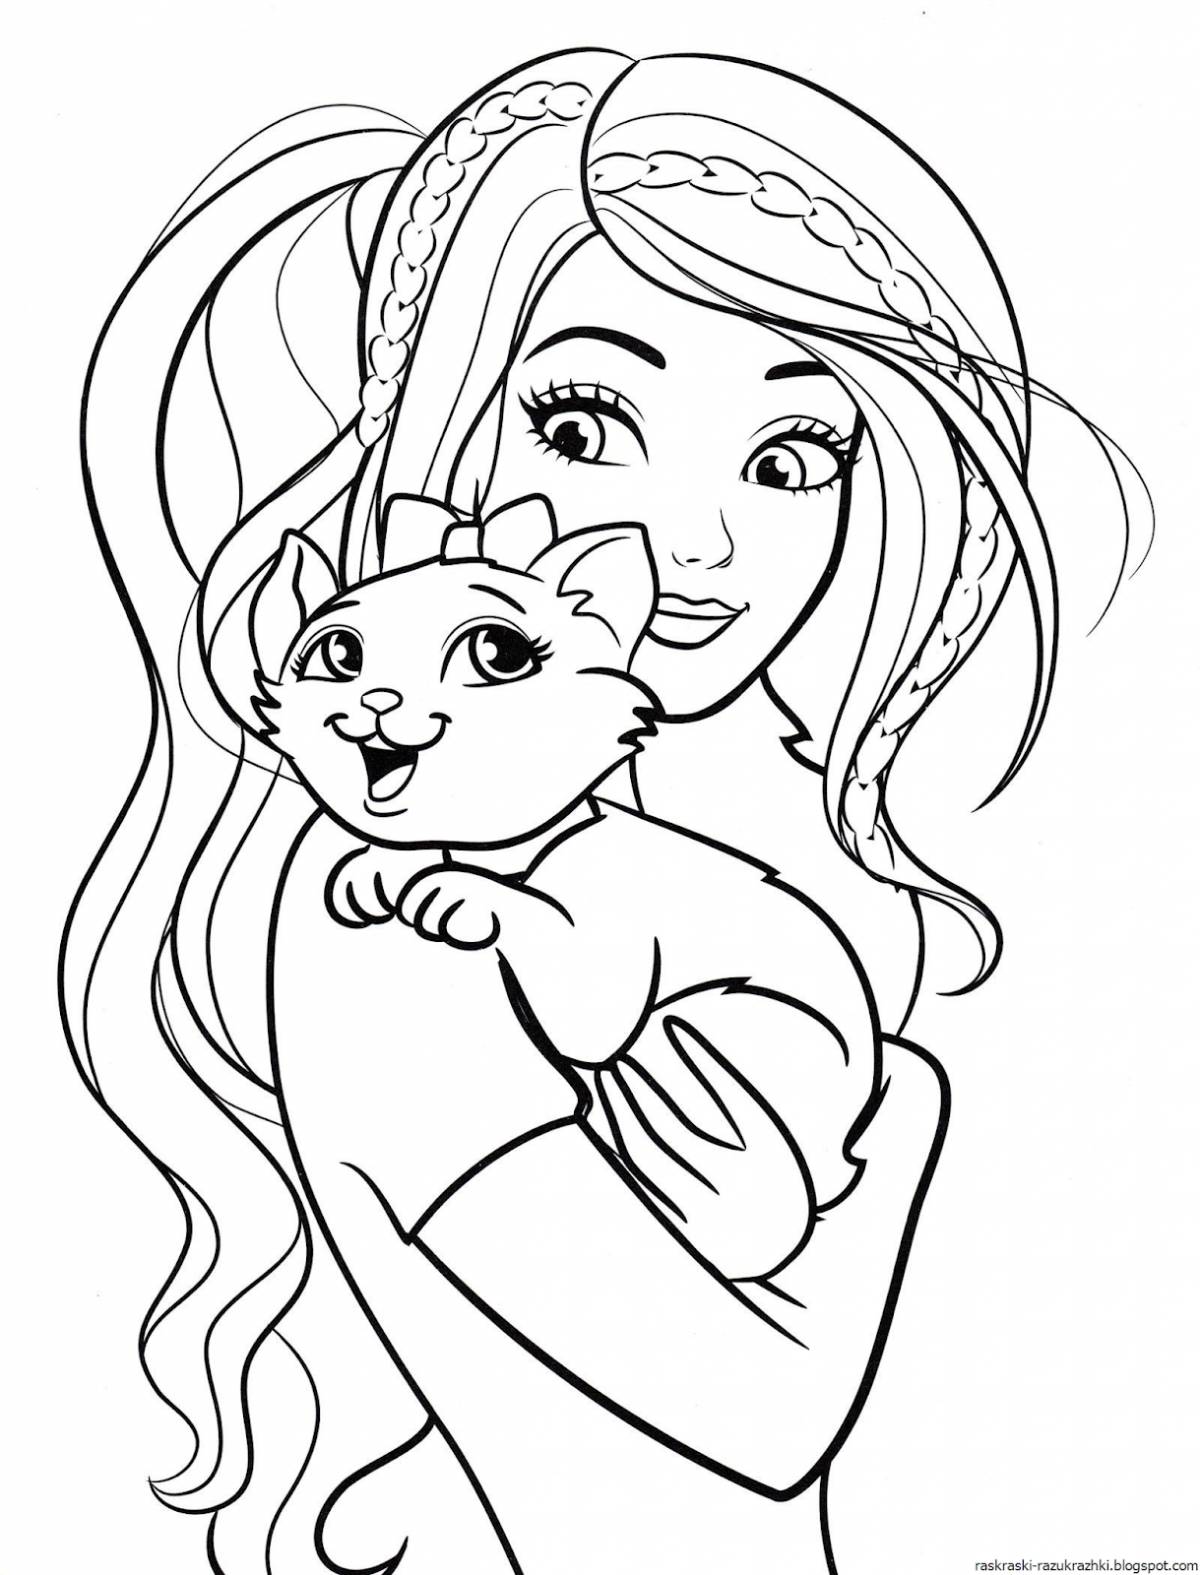 Fancy coloring page for girls